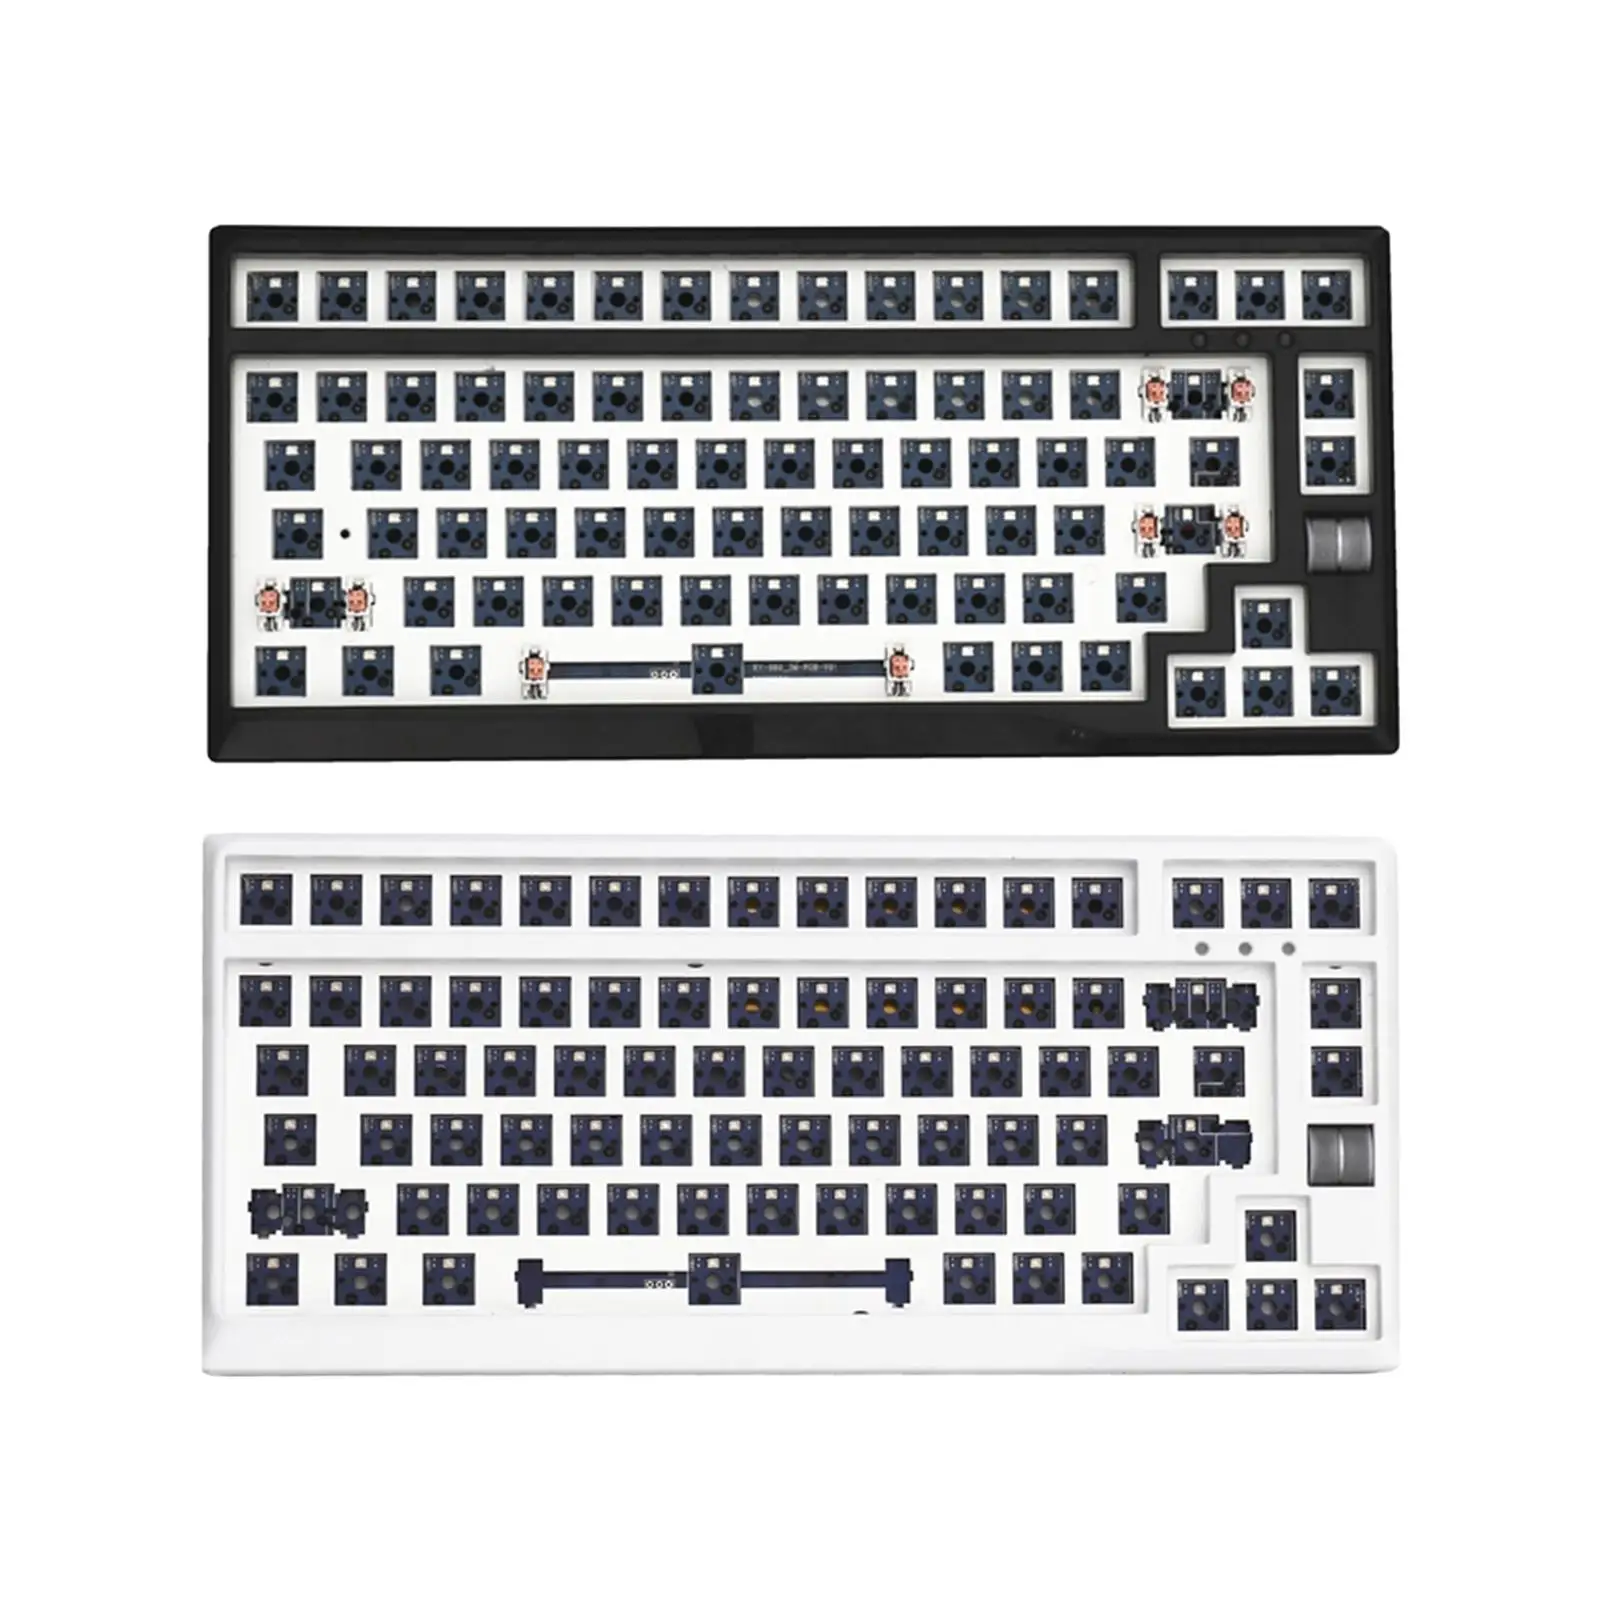  Mechanical Keyboard DIY  75% Compact Layout  Switches for PC